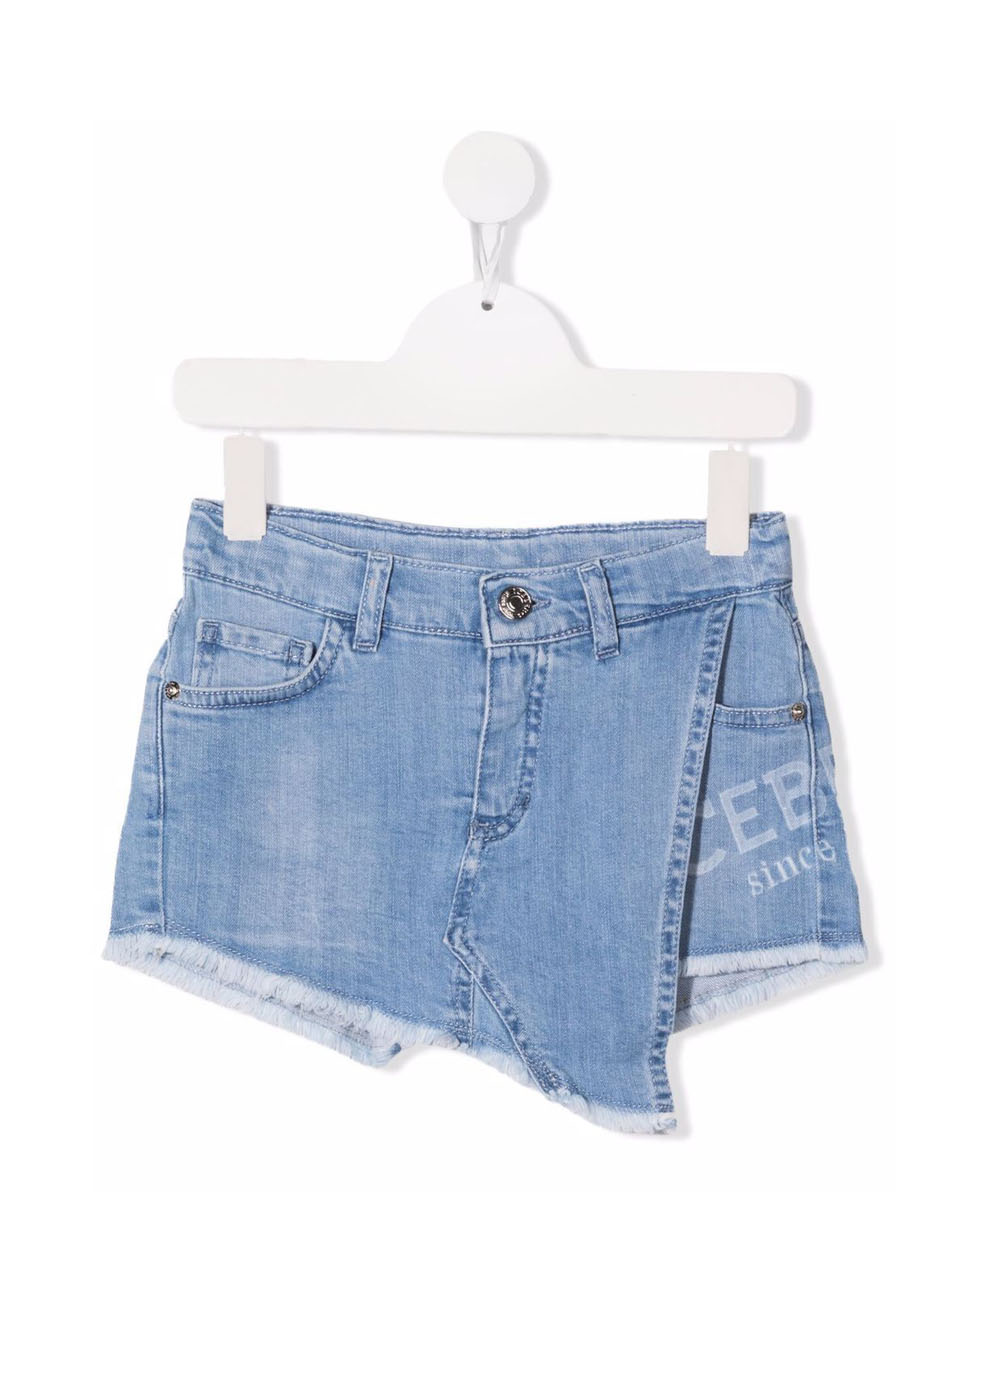 Featured image for “ICEBERG SHORTS IN DENIM”